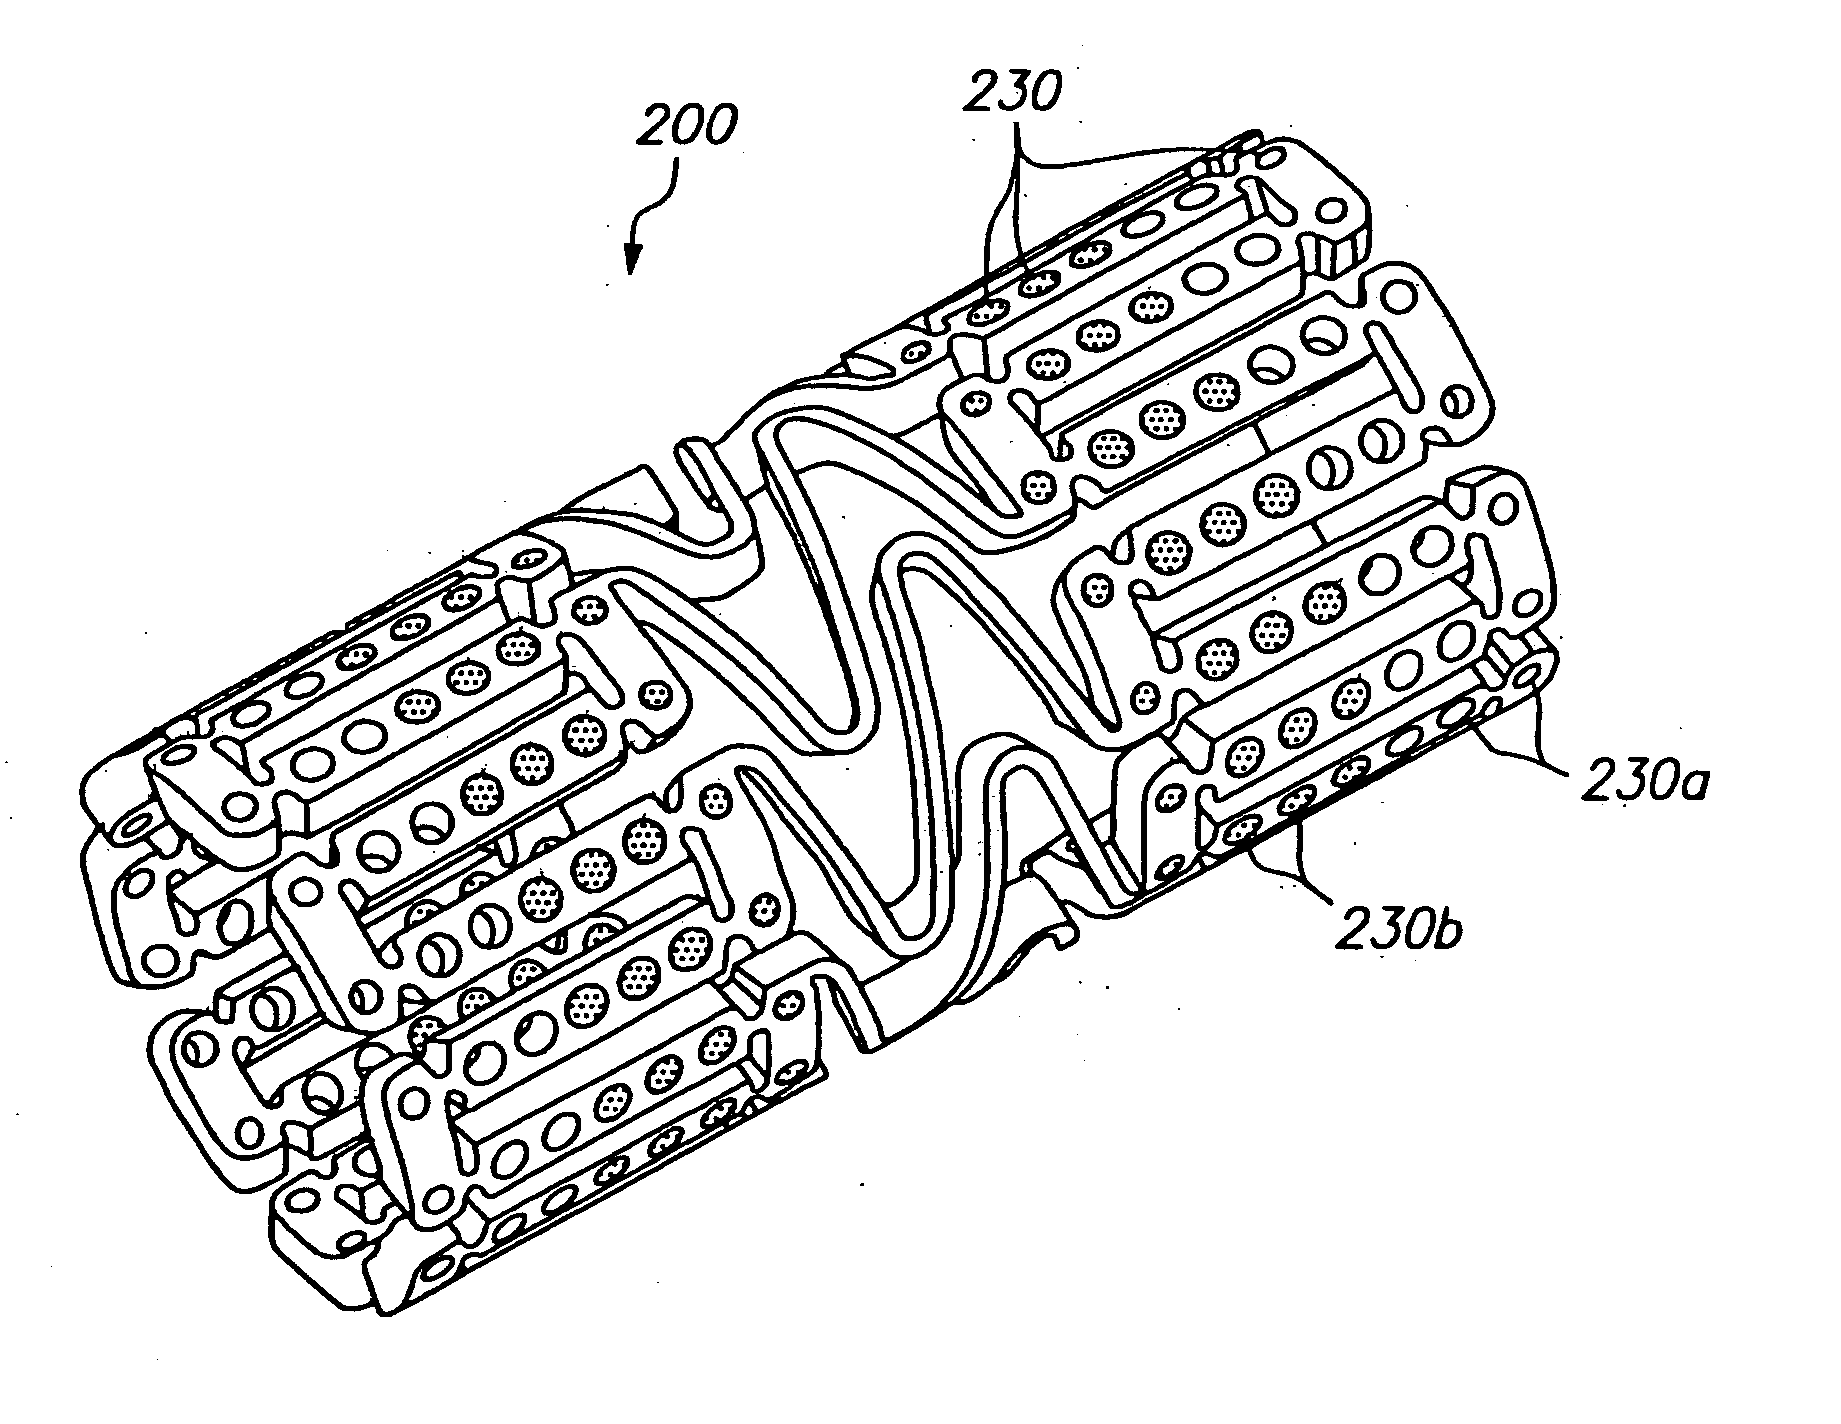 Expandable medical device with openings for delivery of multiple beneficial agents